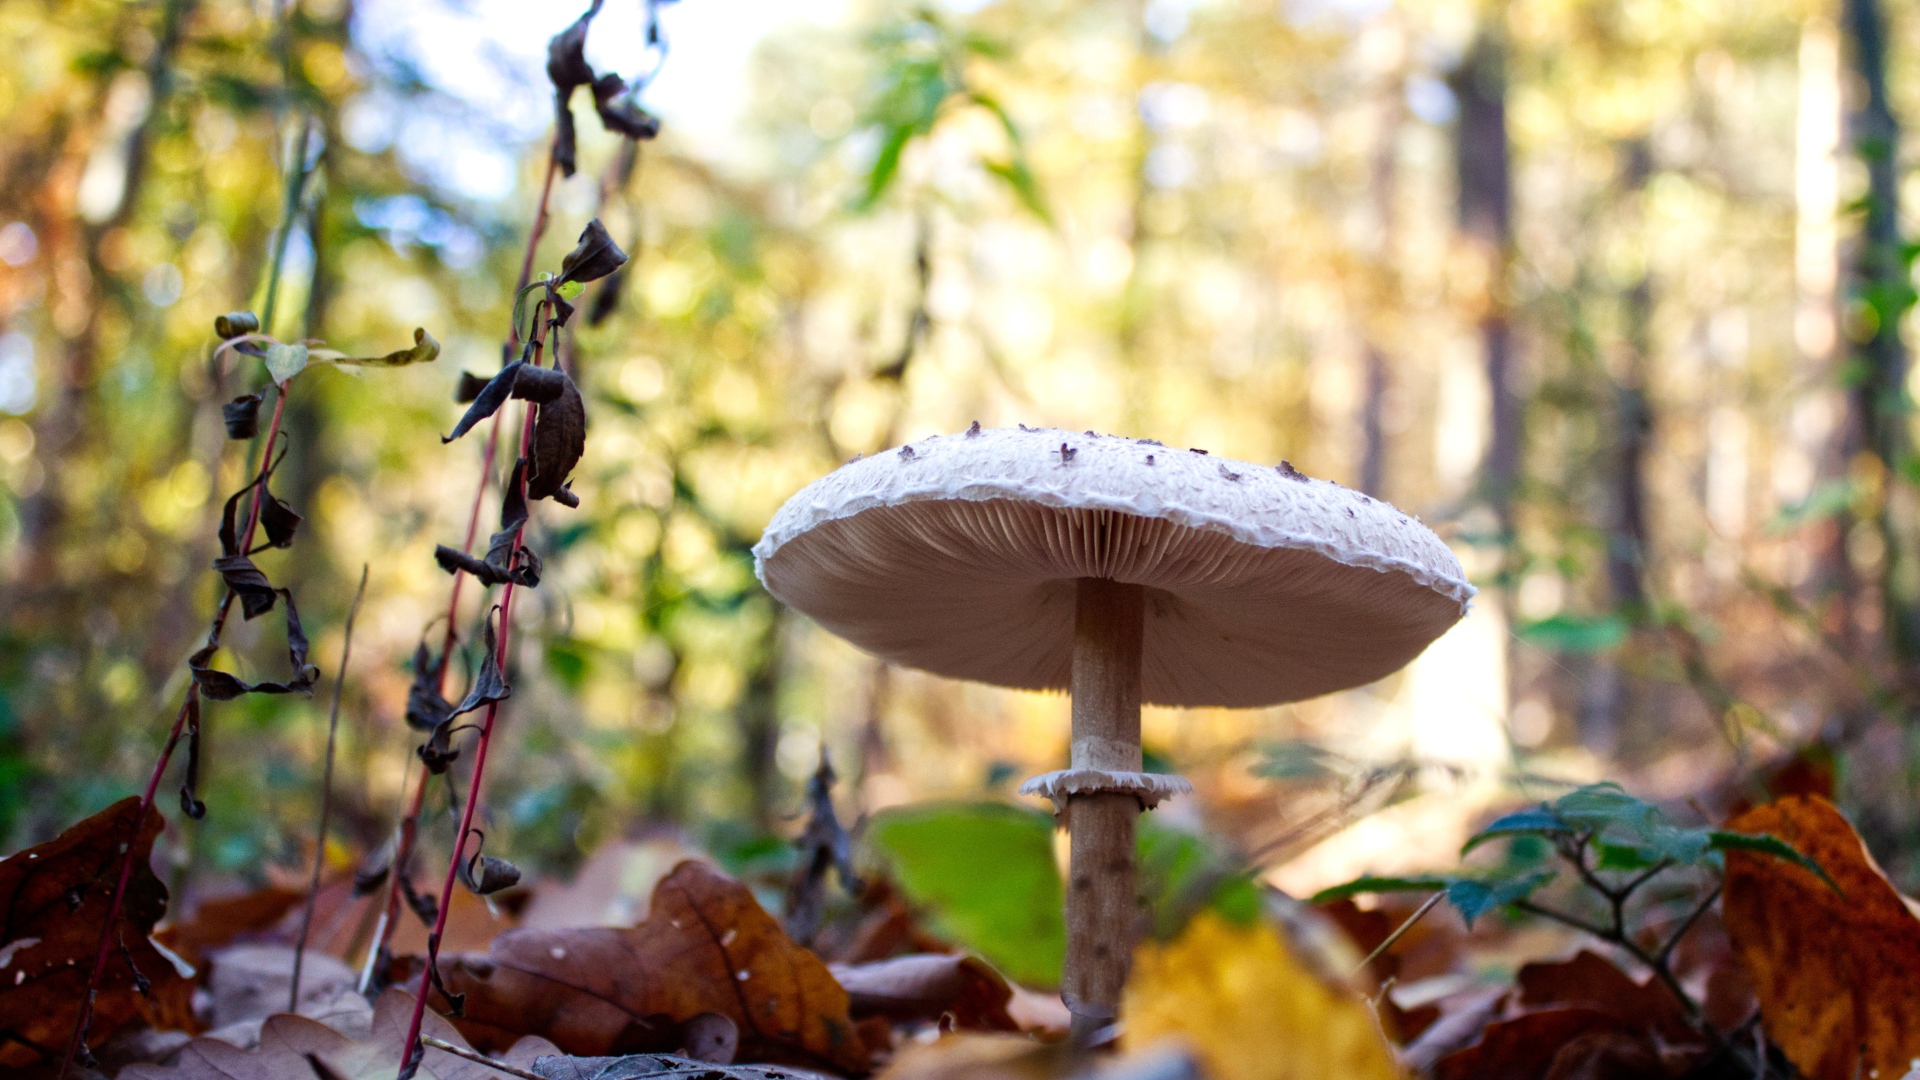 Beautiful white mushroom in the forest with dry leaves